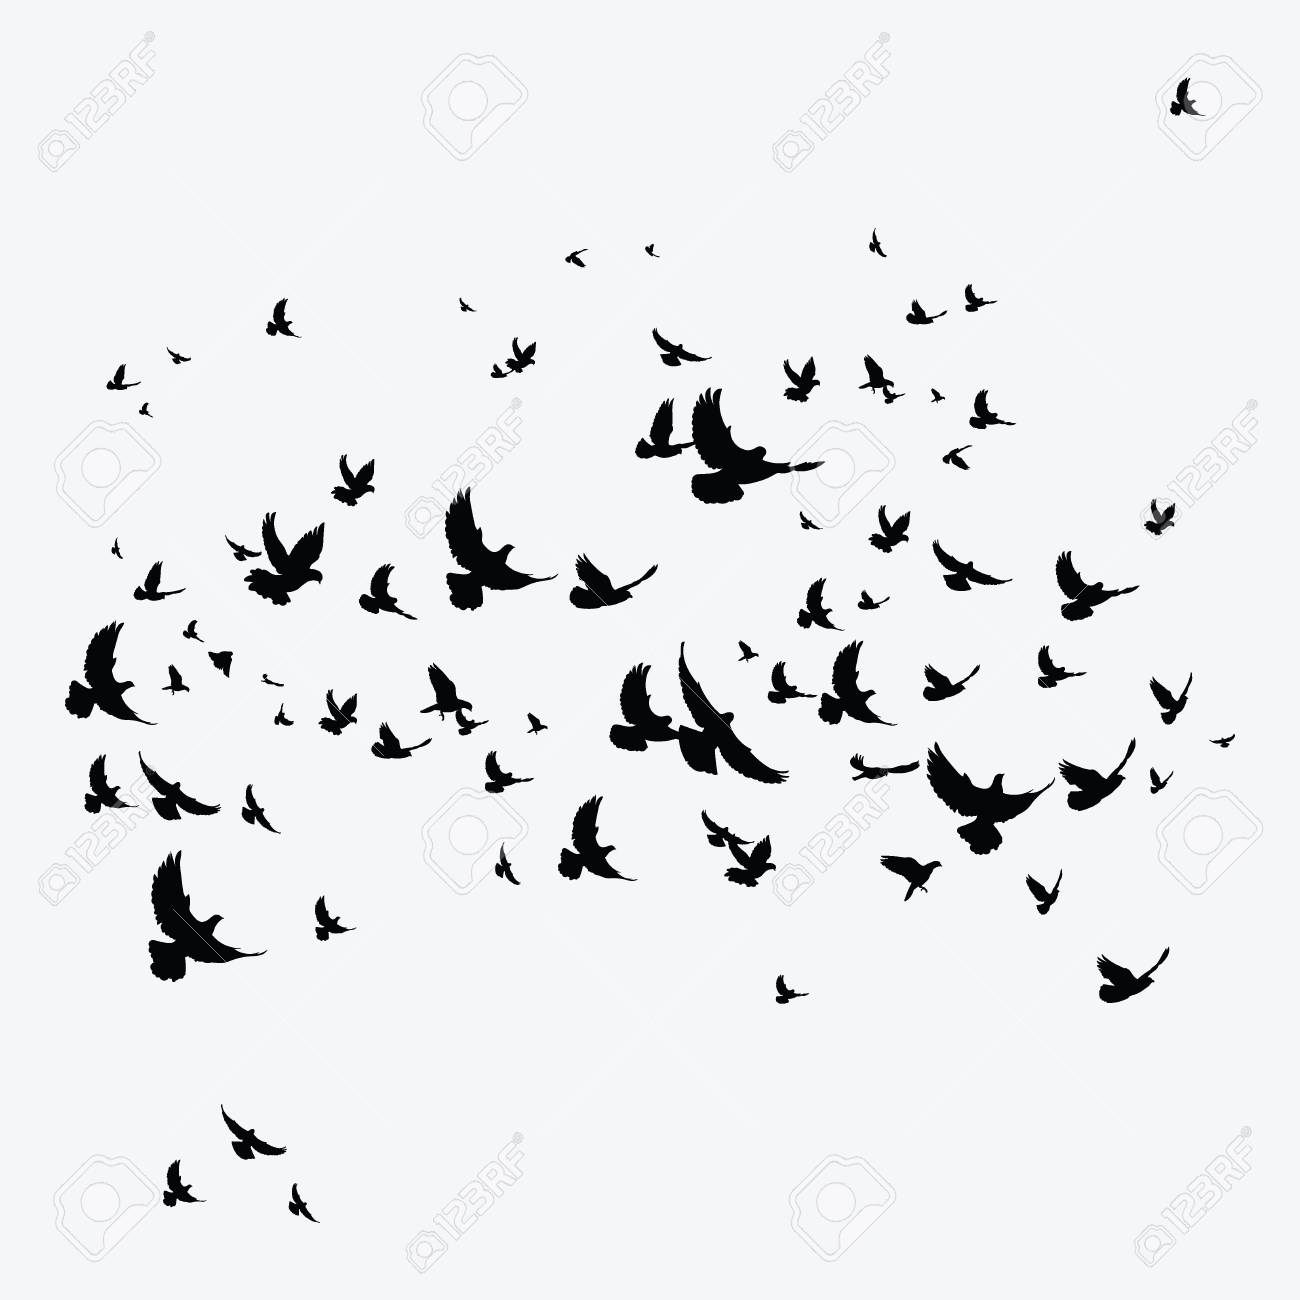 Silhouette Of A Flock Of Birds Black Contours Of Flying Birds with regard to sizing 1300 X 1300